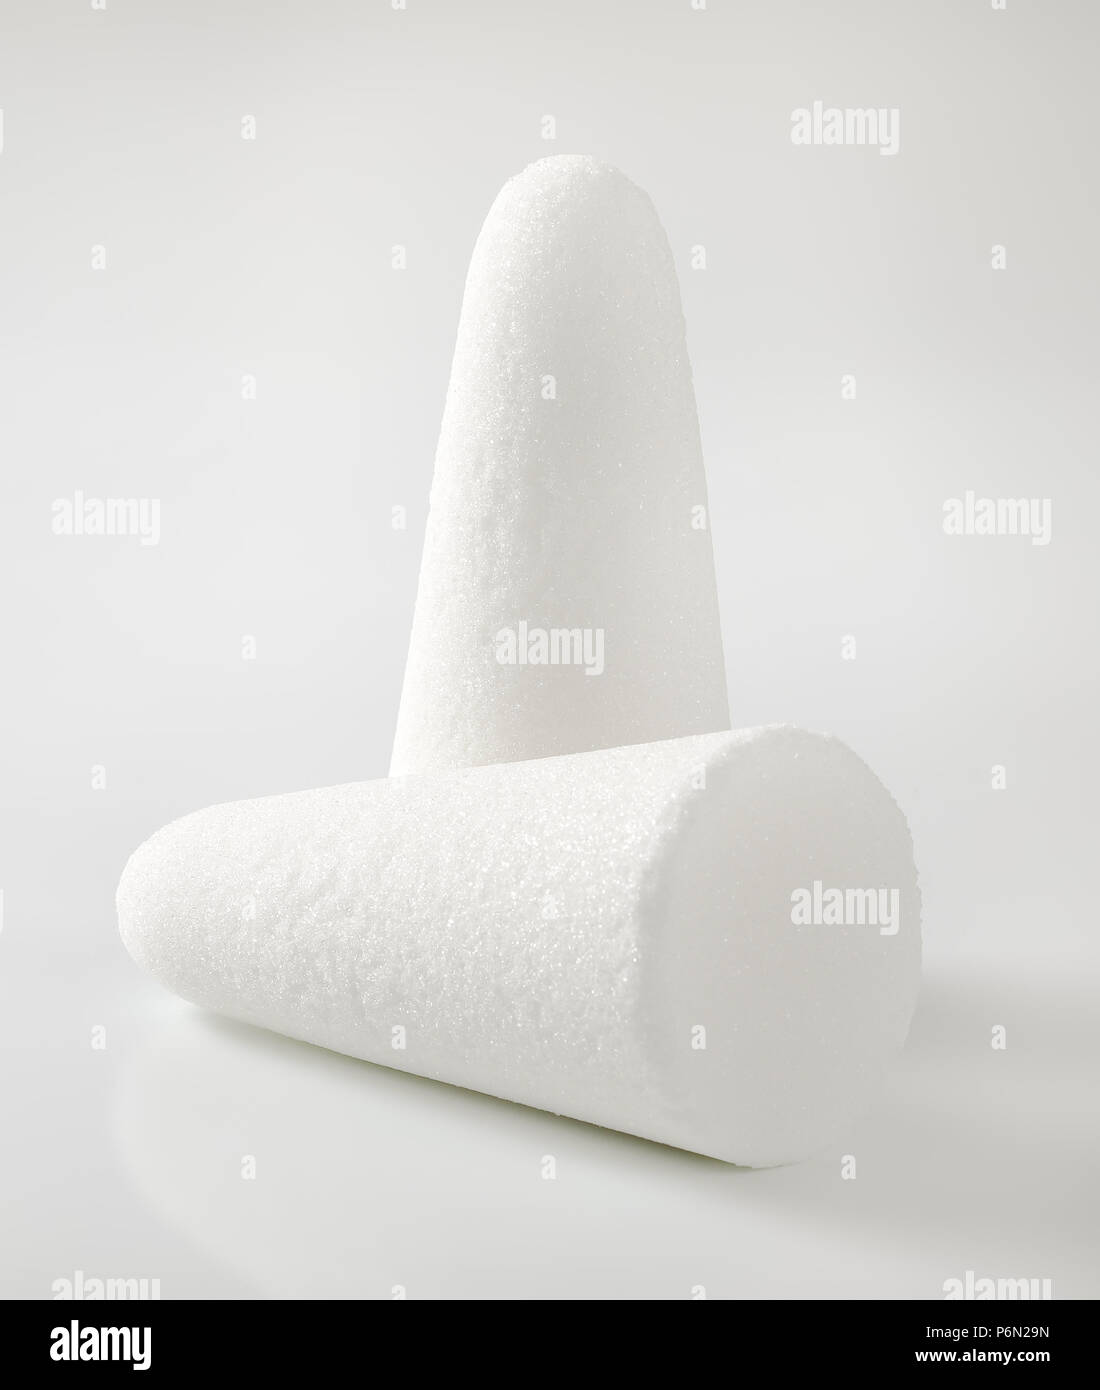 two white sugar loaves or cones on white background Stock Photo